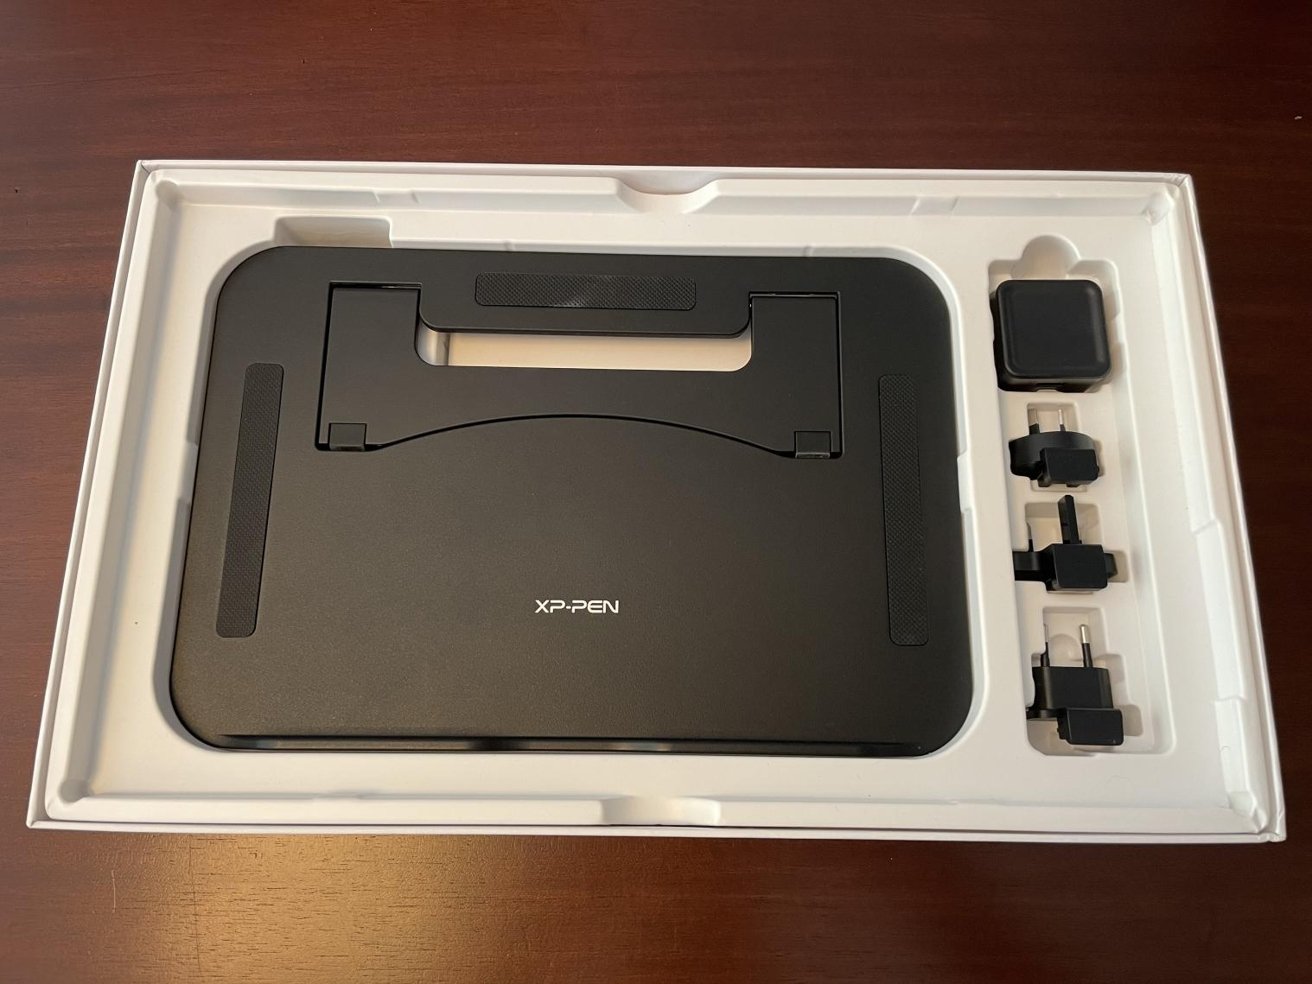 The box is tightly packed, with the stand and power adapter options included below the tablet itself. 